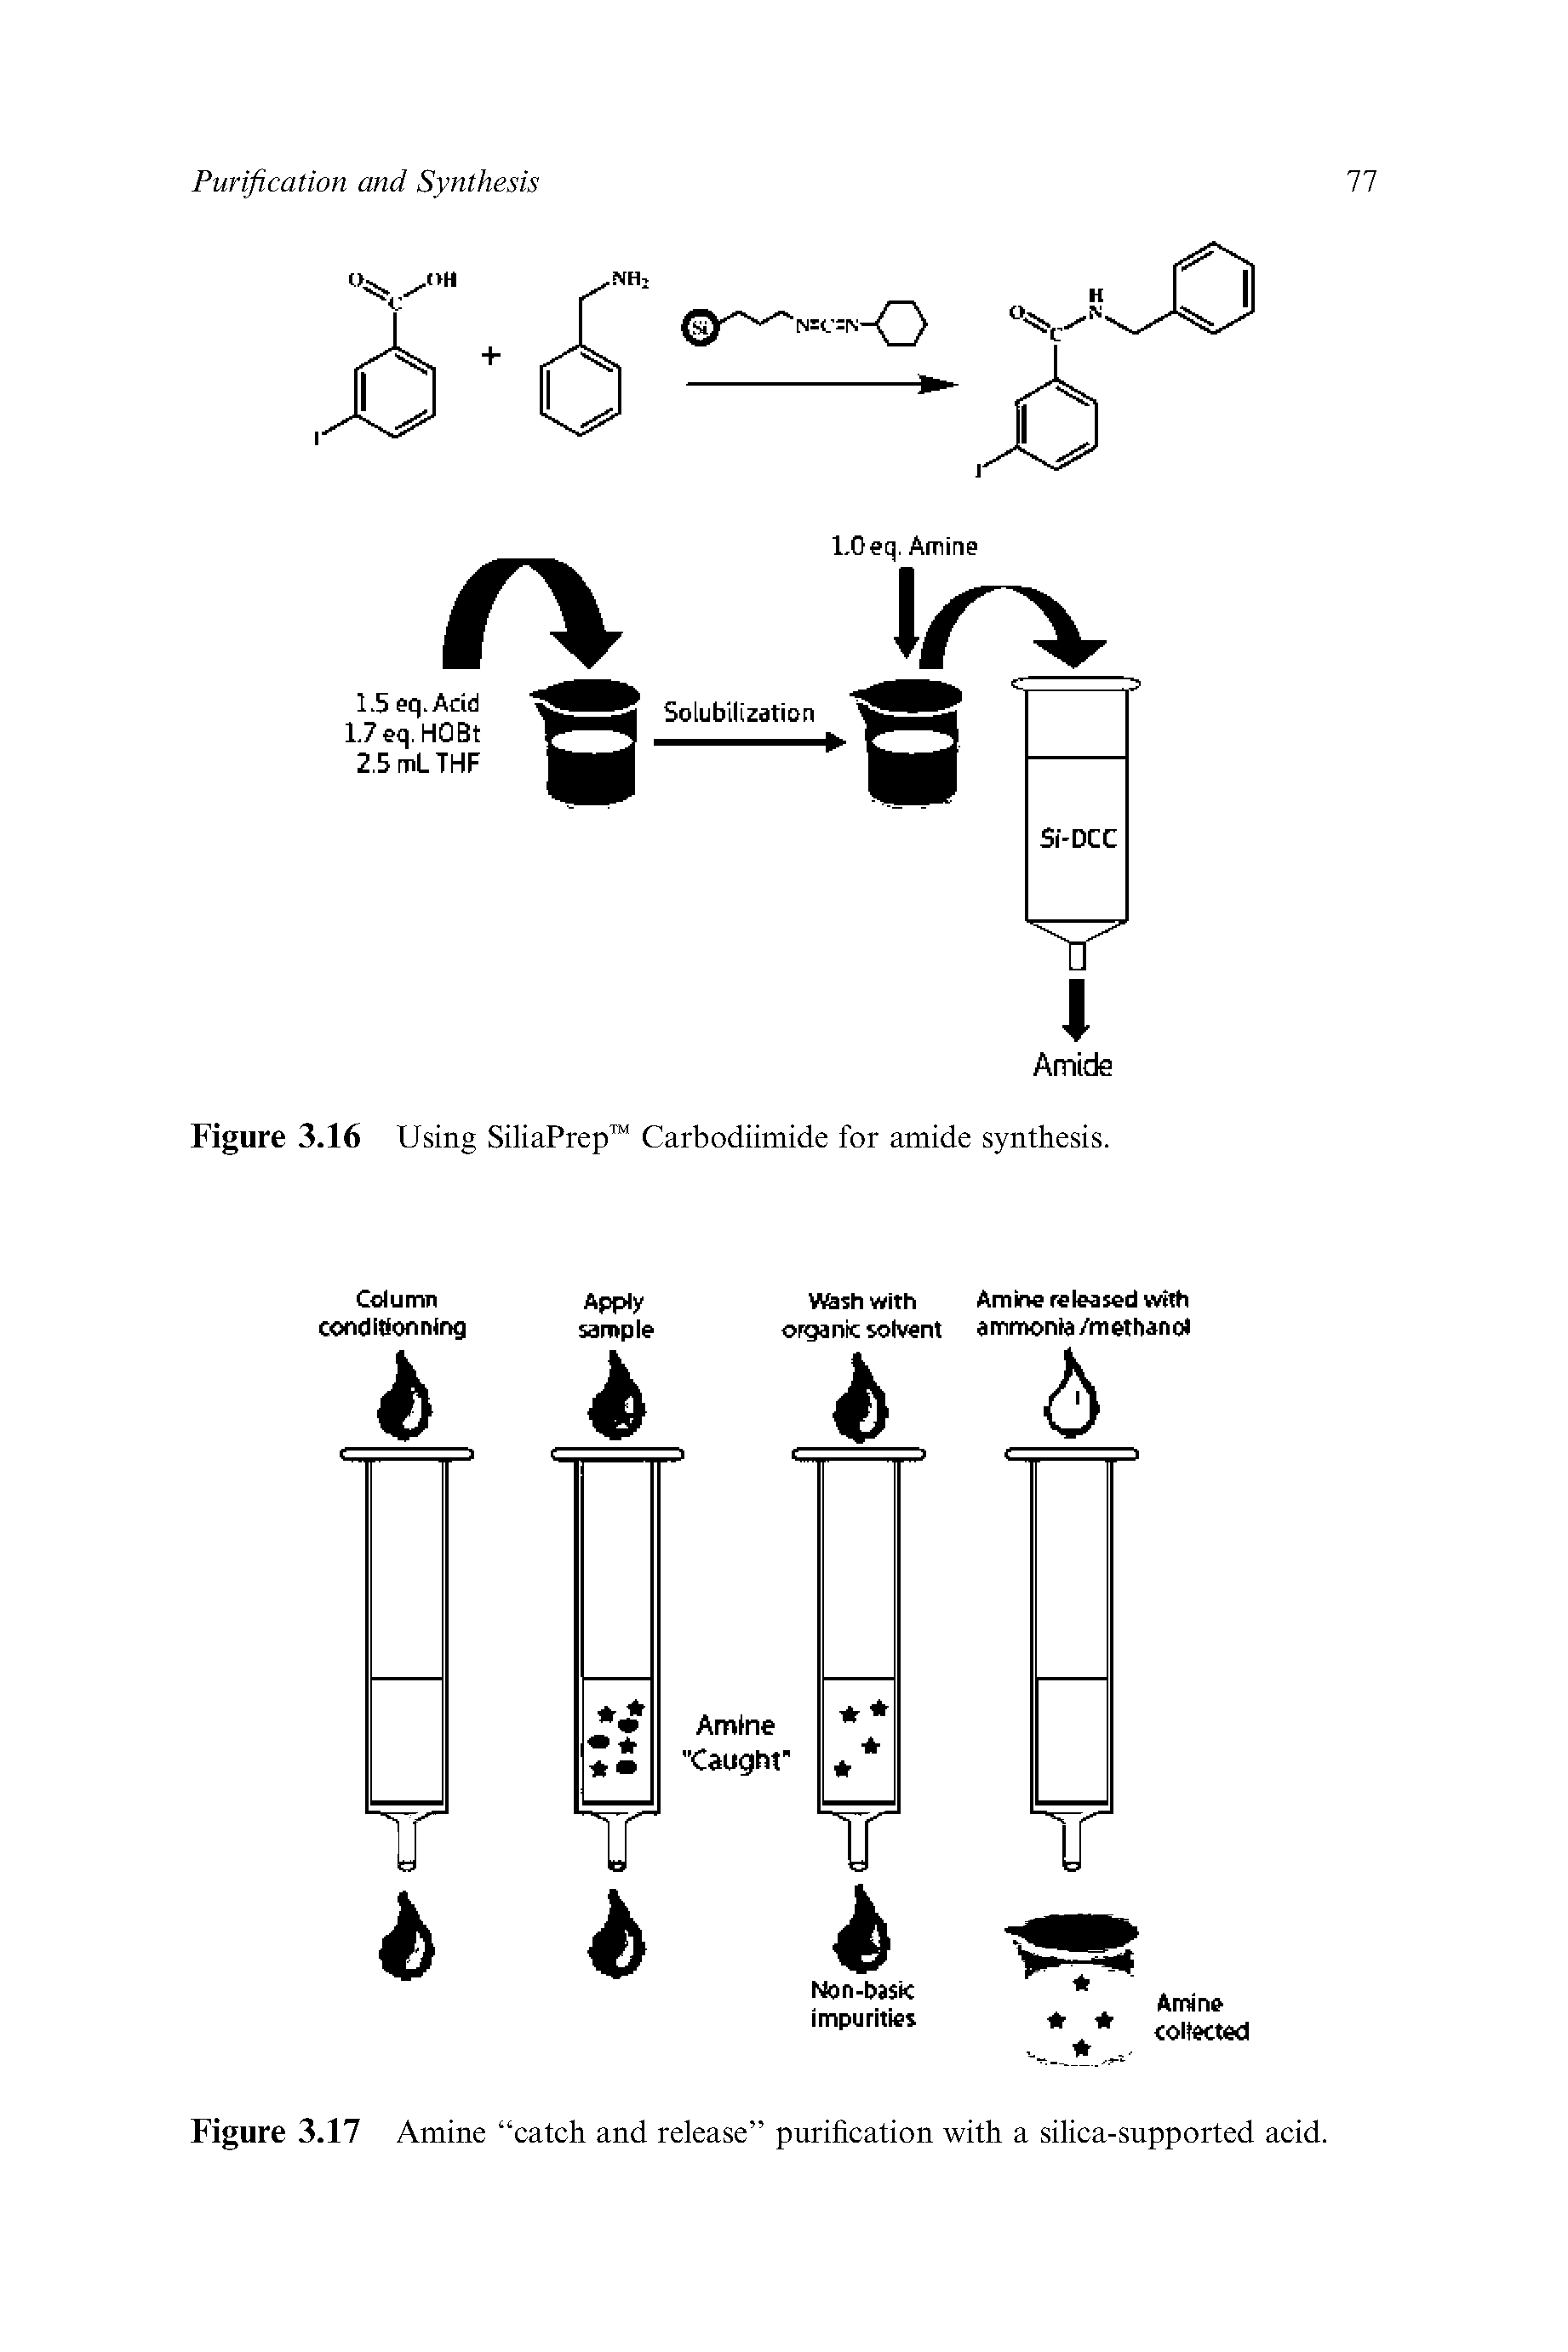 Figure 3.17 Amine catch and release purification with a silica-supported acid.